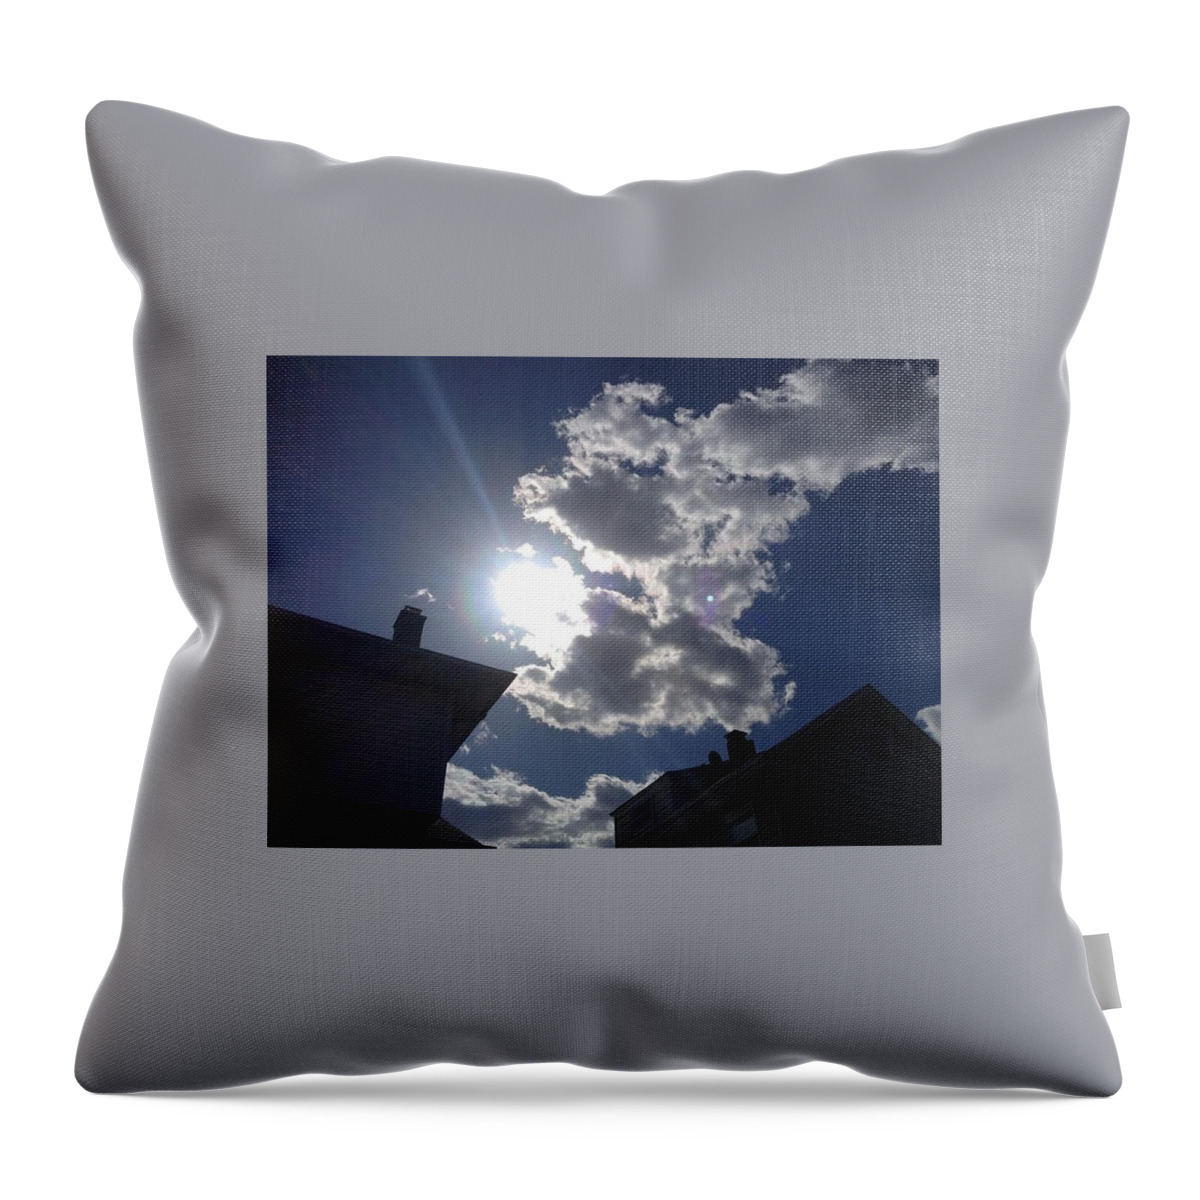 Clouds Throw Pillow featuring the photograph Clouds #1 by Jessica Cistrelli